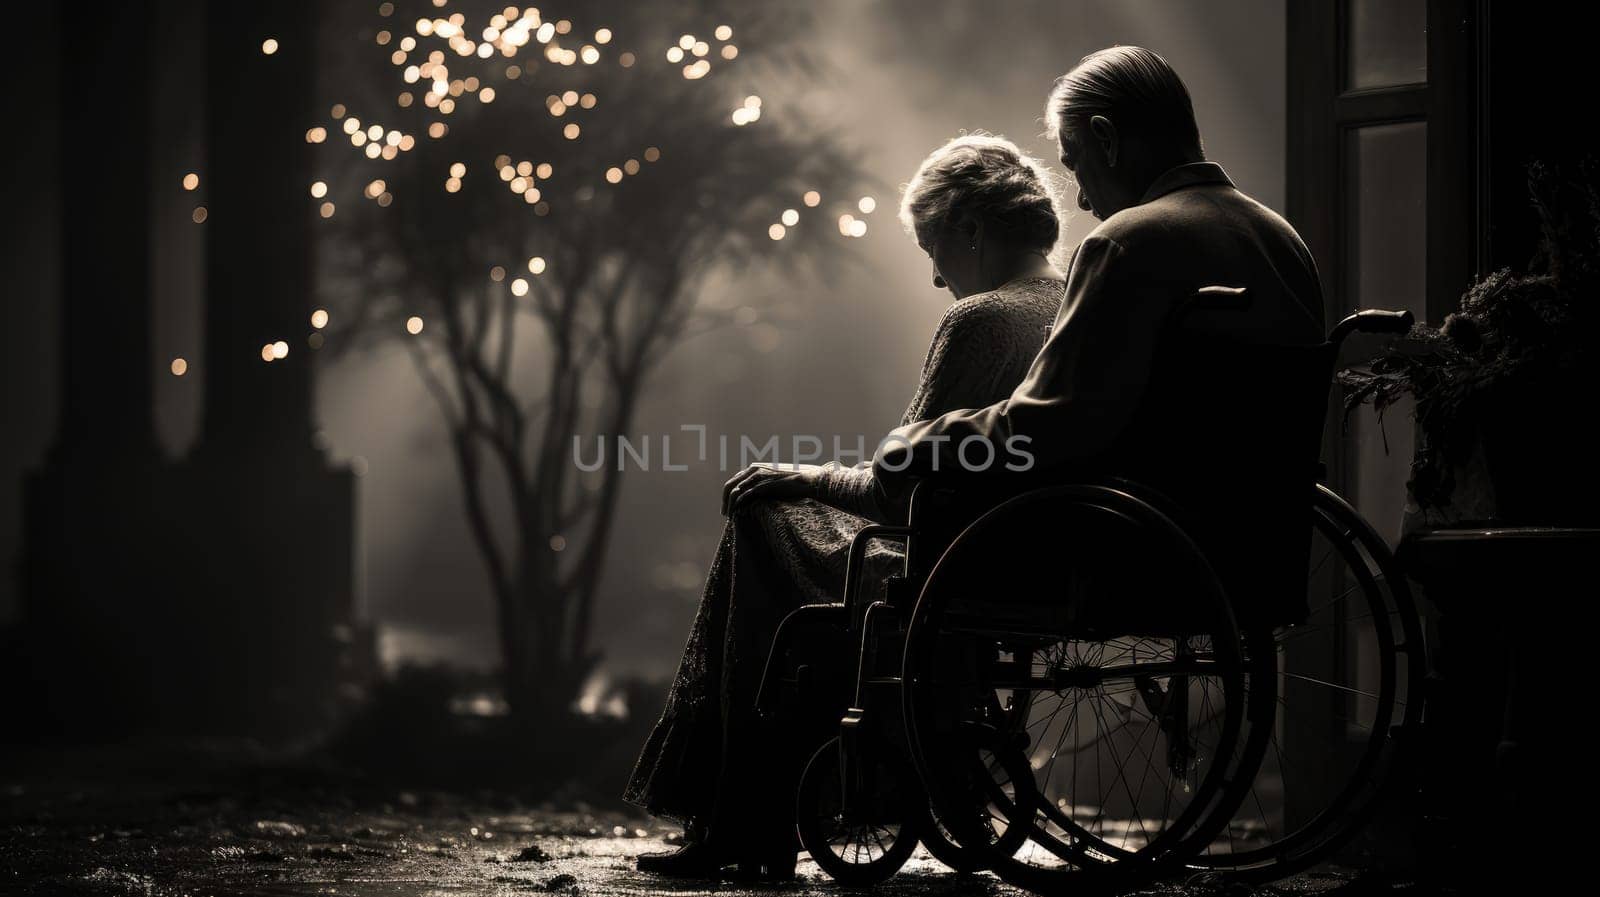 Loving couple in wheelchairs. A man and a woman on wheelchairs enjoy each others company and fellowship